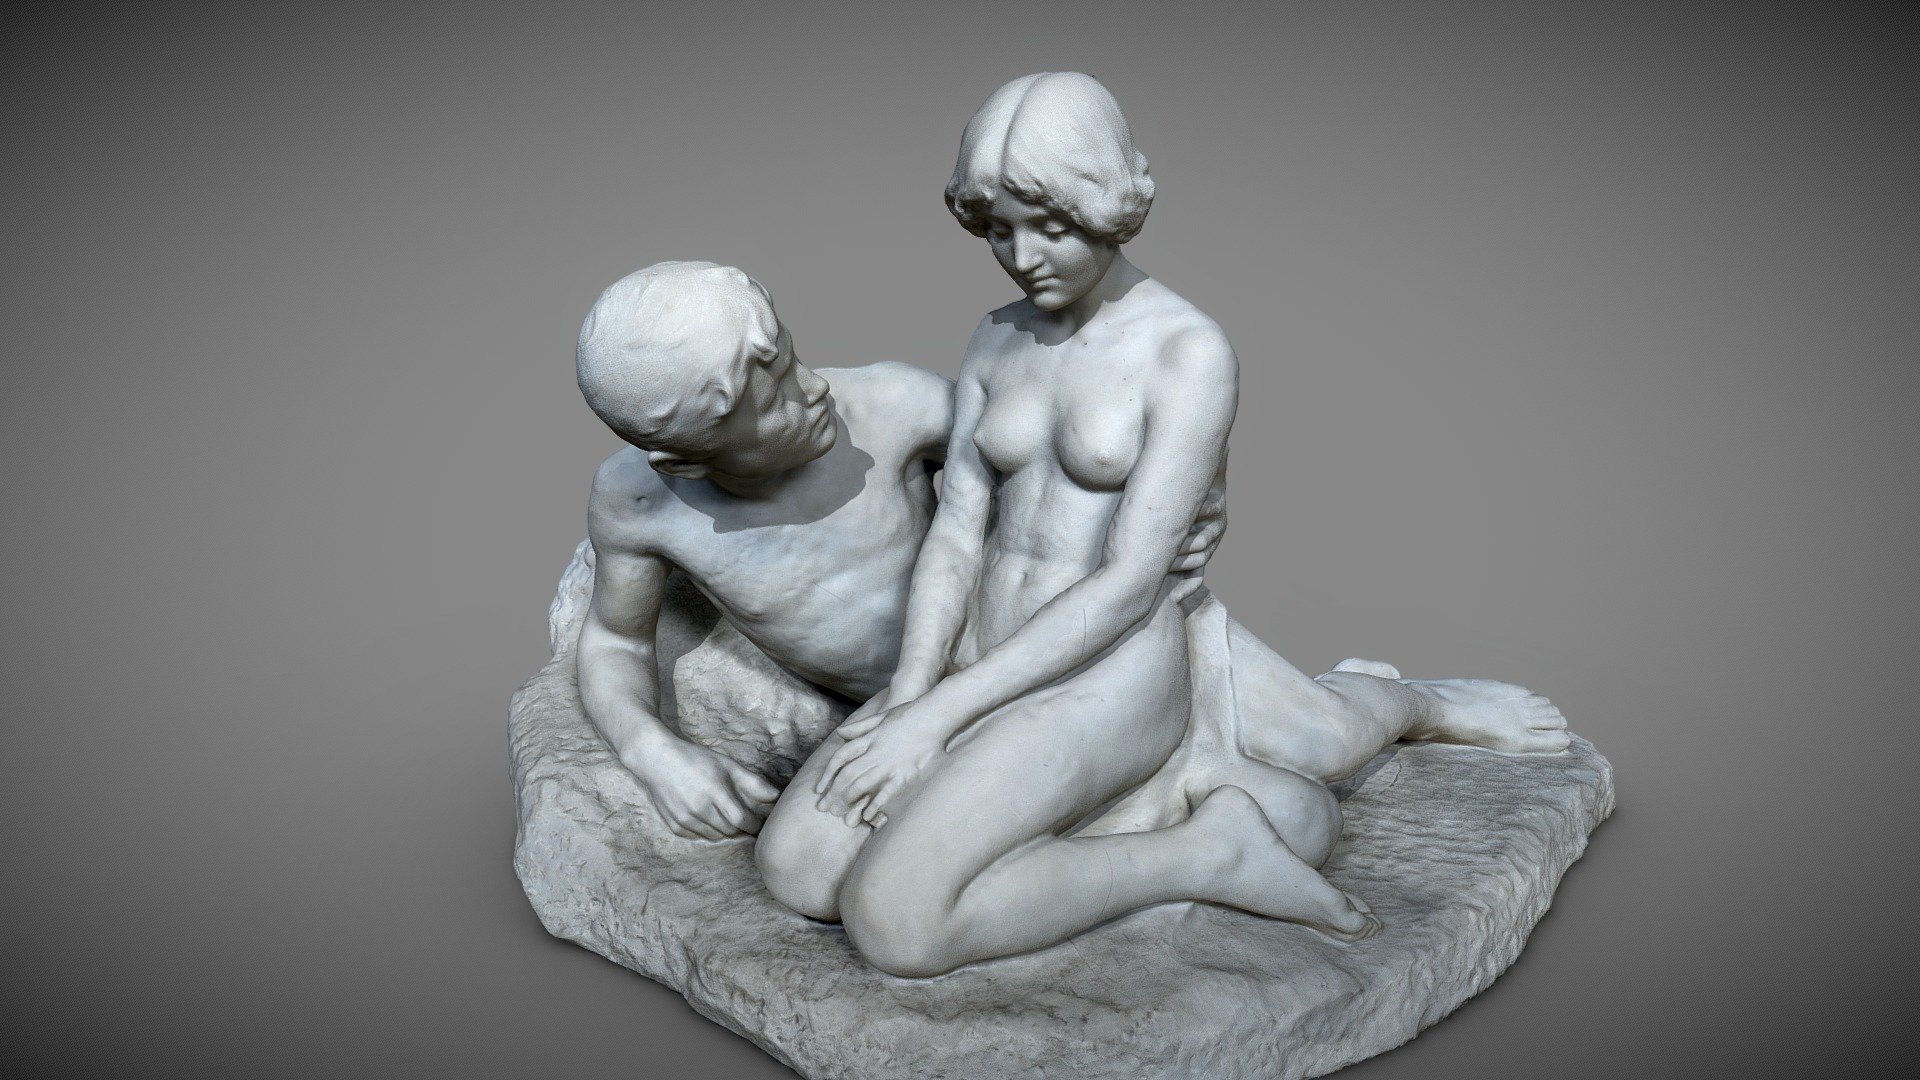 Idyl (1912-1914) by Stephan sinding (1846-1922), marble. Ny Carlsberg Glyptotek (Copenhagen, Denmark). Made with Zephyr3D Lite from 3DFlow.

For more updates, please consider to follow me  on Twitter at @GeoffreyMarchal. (https://twitter.com/GeoffreyMarchal) - Idyl - Buy Royalty Free 3D model by Geoffrey Marchal (@geoffreymarchal) 3d model